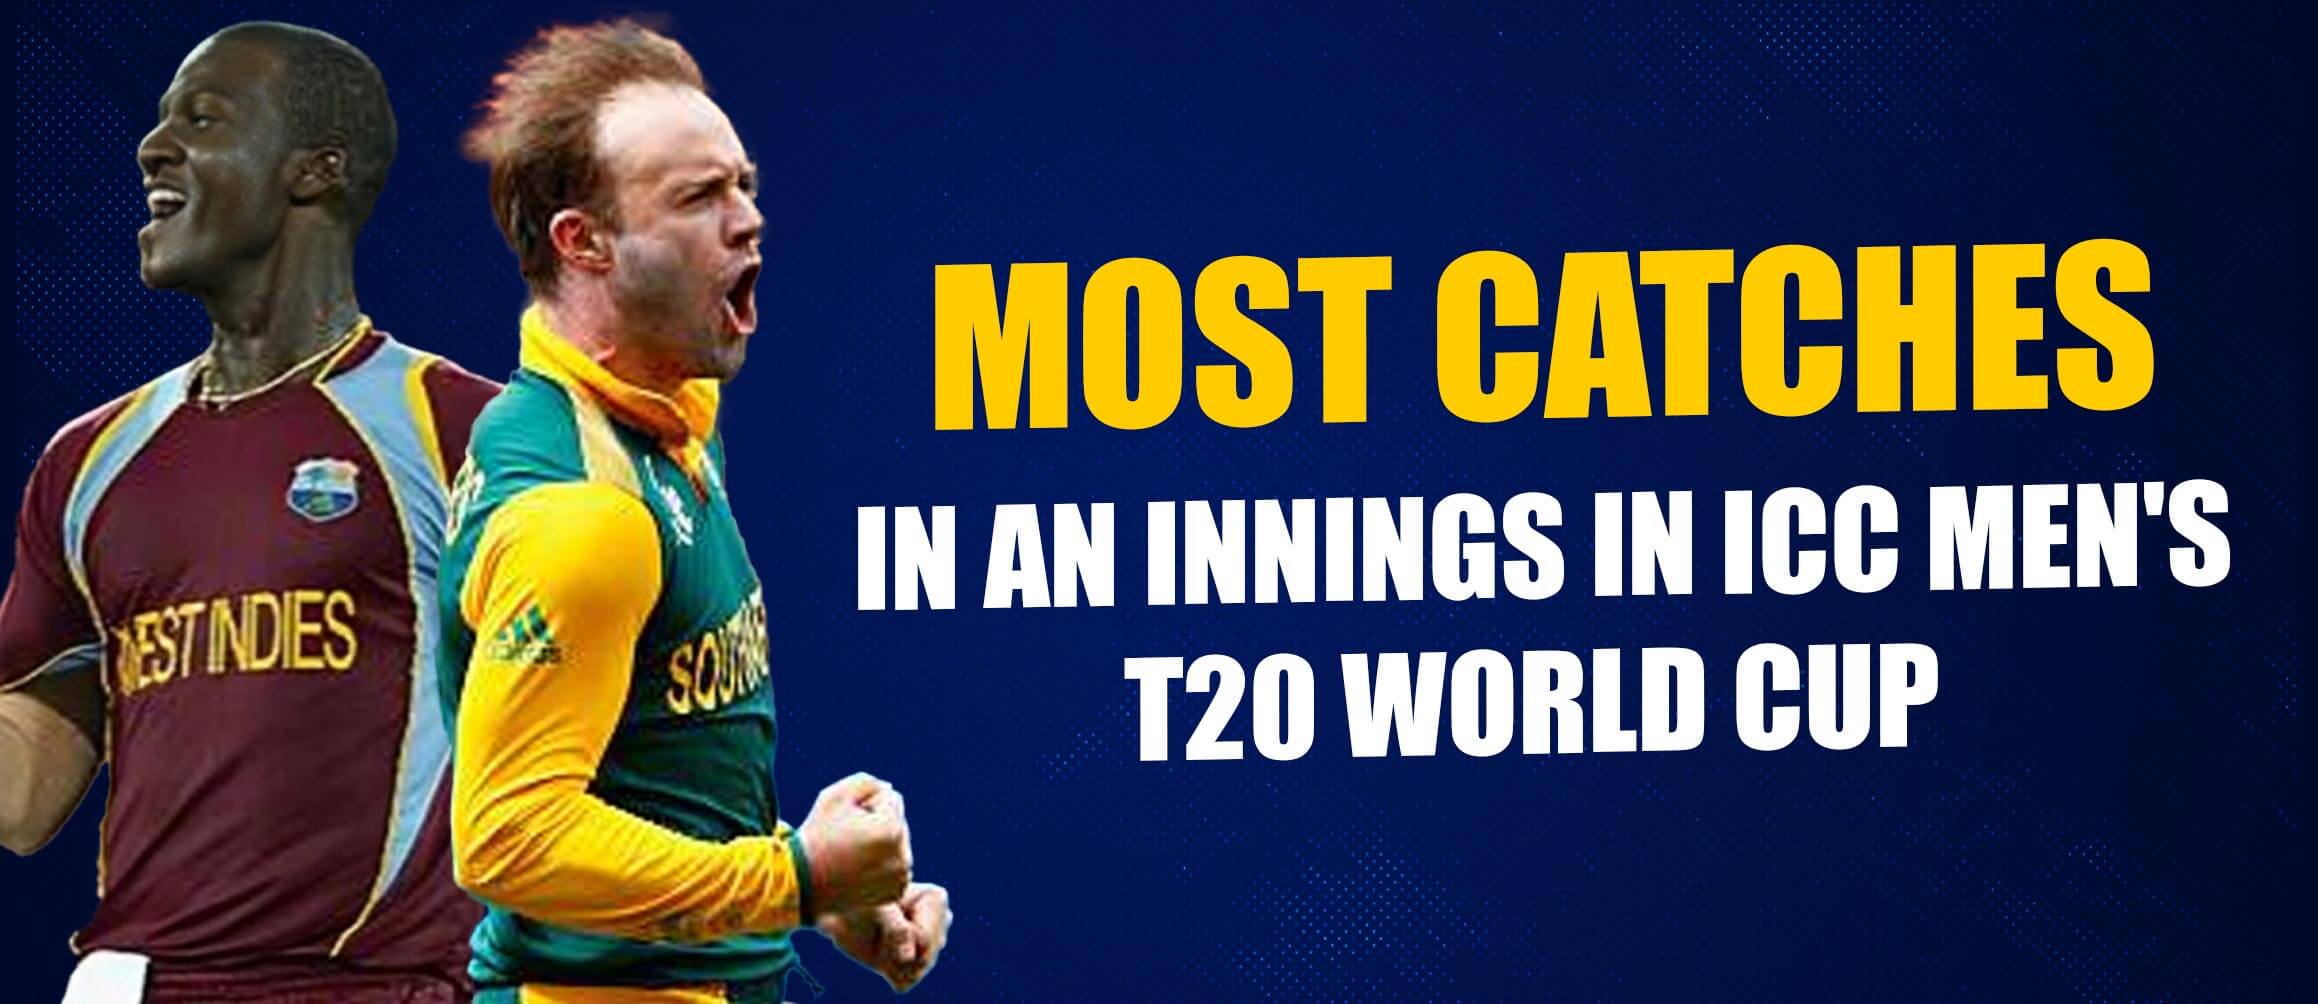 Most Catches in An Innings in ICC Men’s T20 World Cup